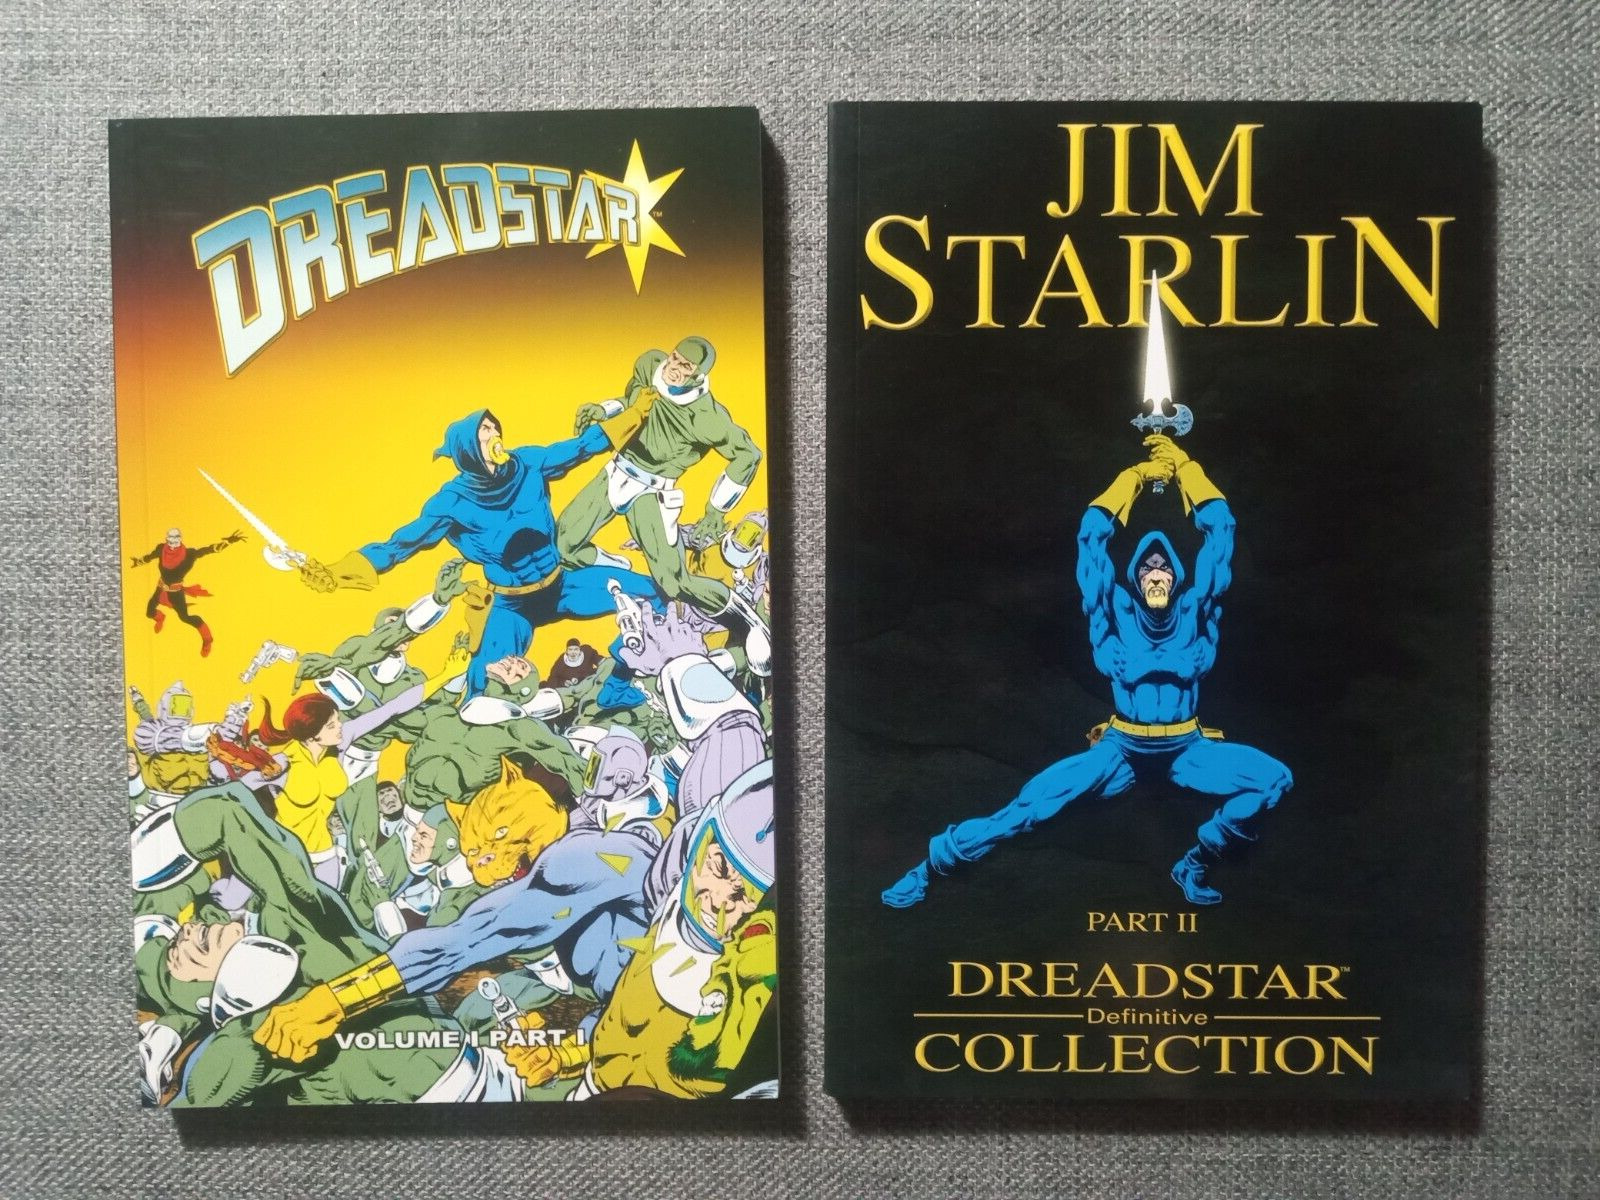 Dreadstar Definitive Collection Vol 1, Part I and Part II (2004, Dynamic Forces)